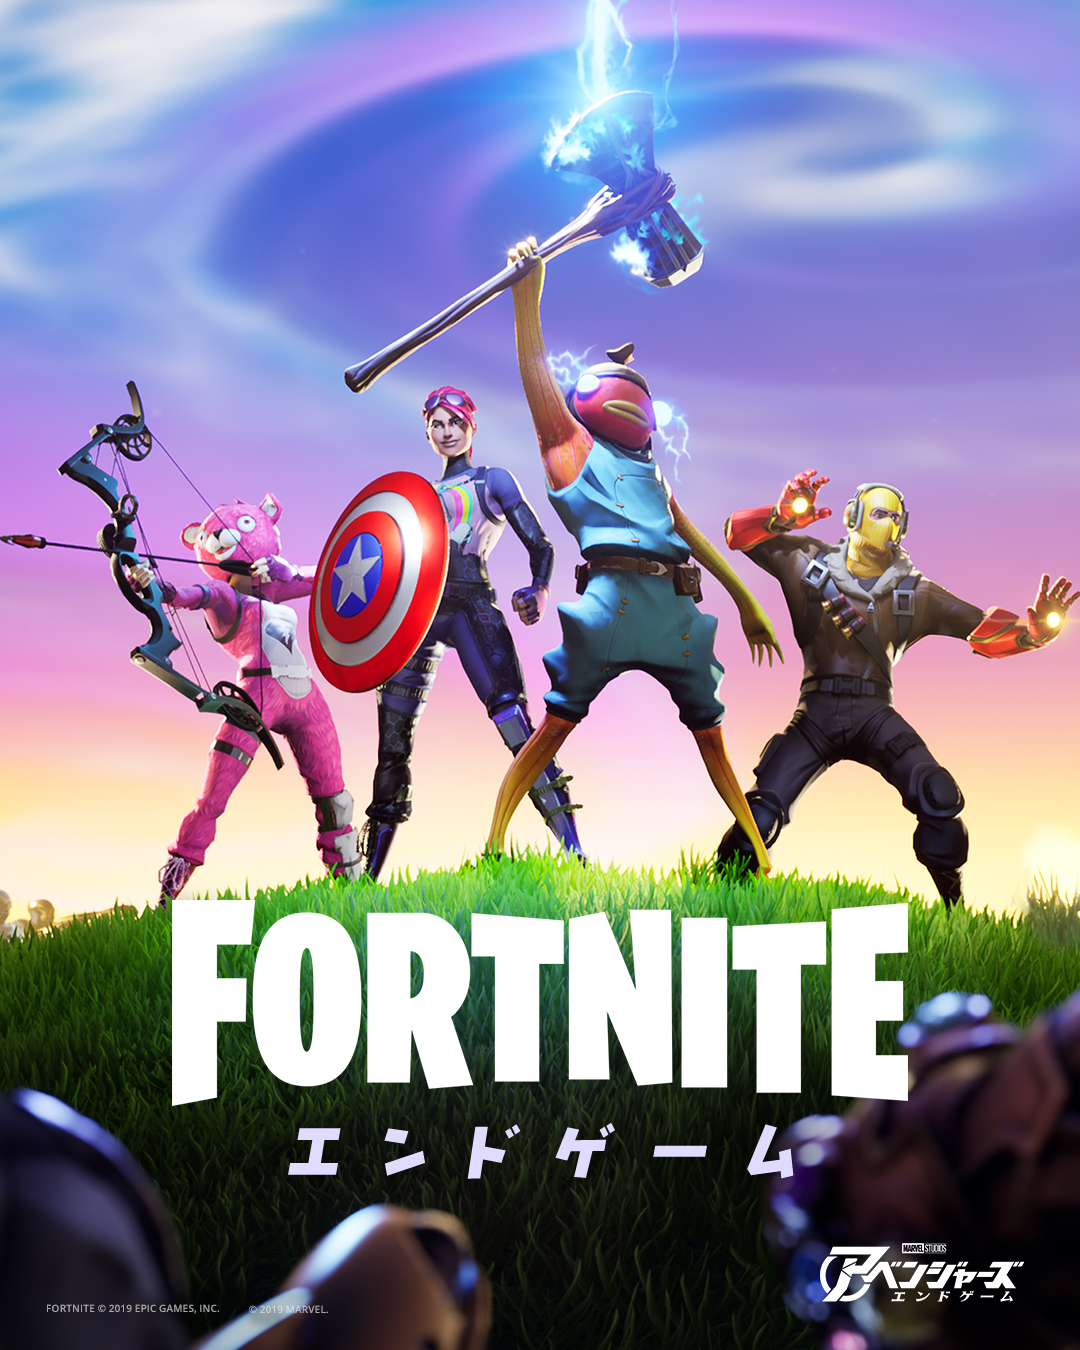 Epic Games フォートナイト アベンジャーズ 期間限定ゲームモード エンドゲーム を開催 Game Watch